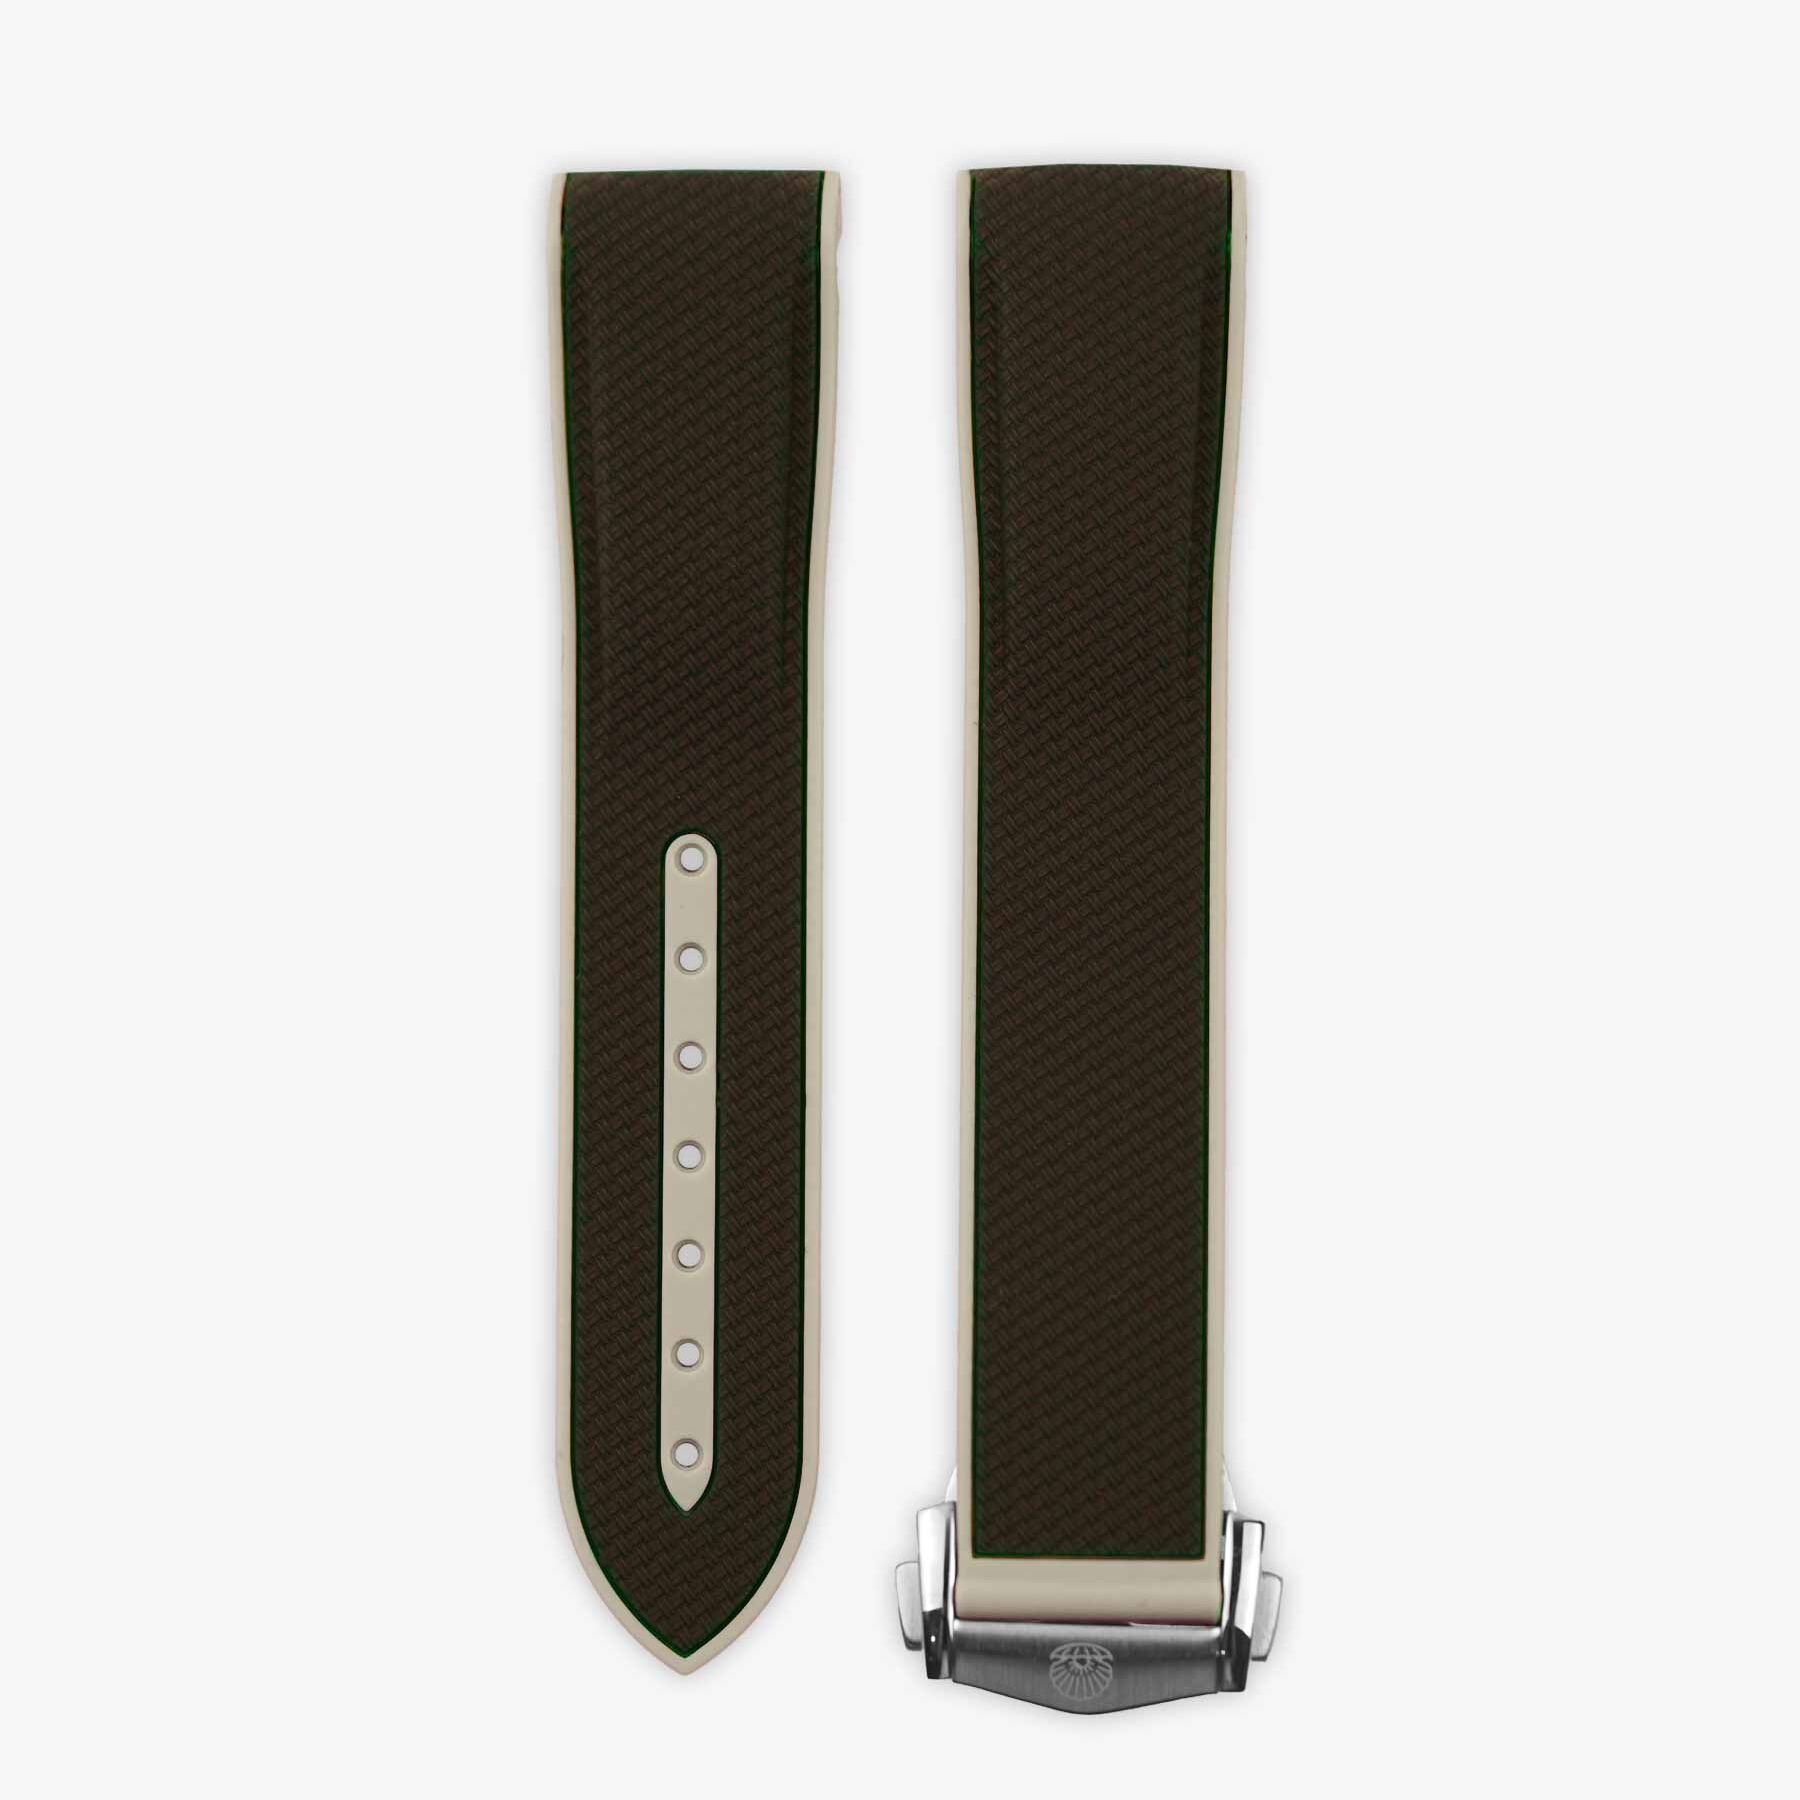 Clam® Rubber Deployment Strap for MoonSwatch - Brown & Beige